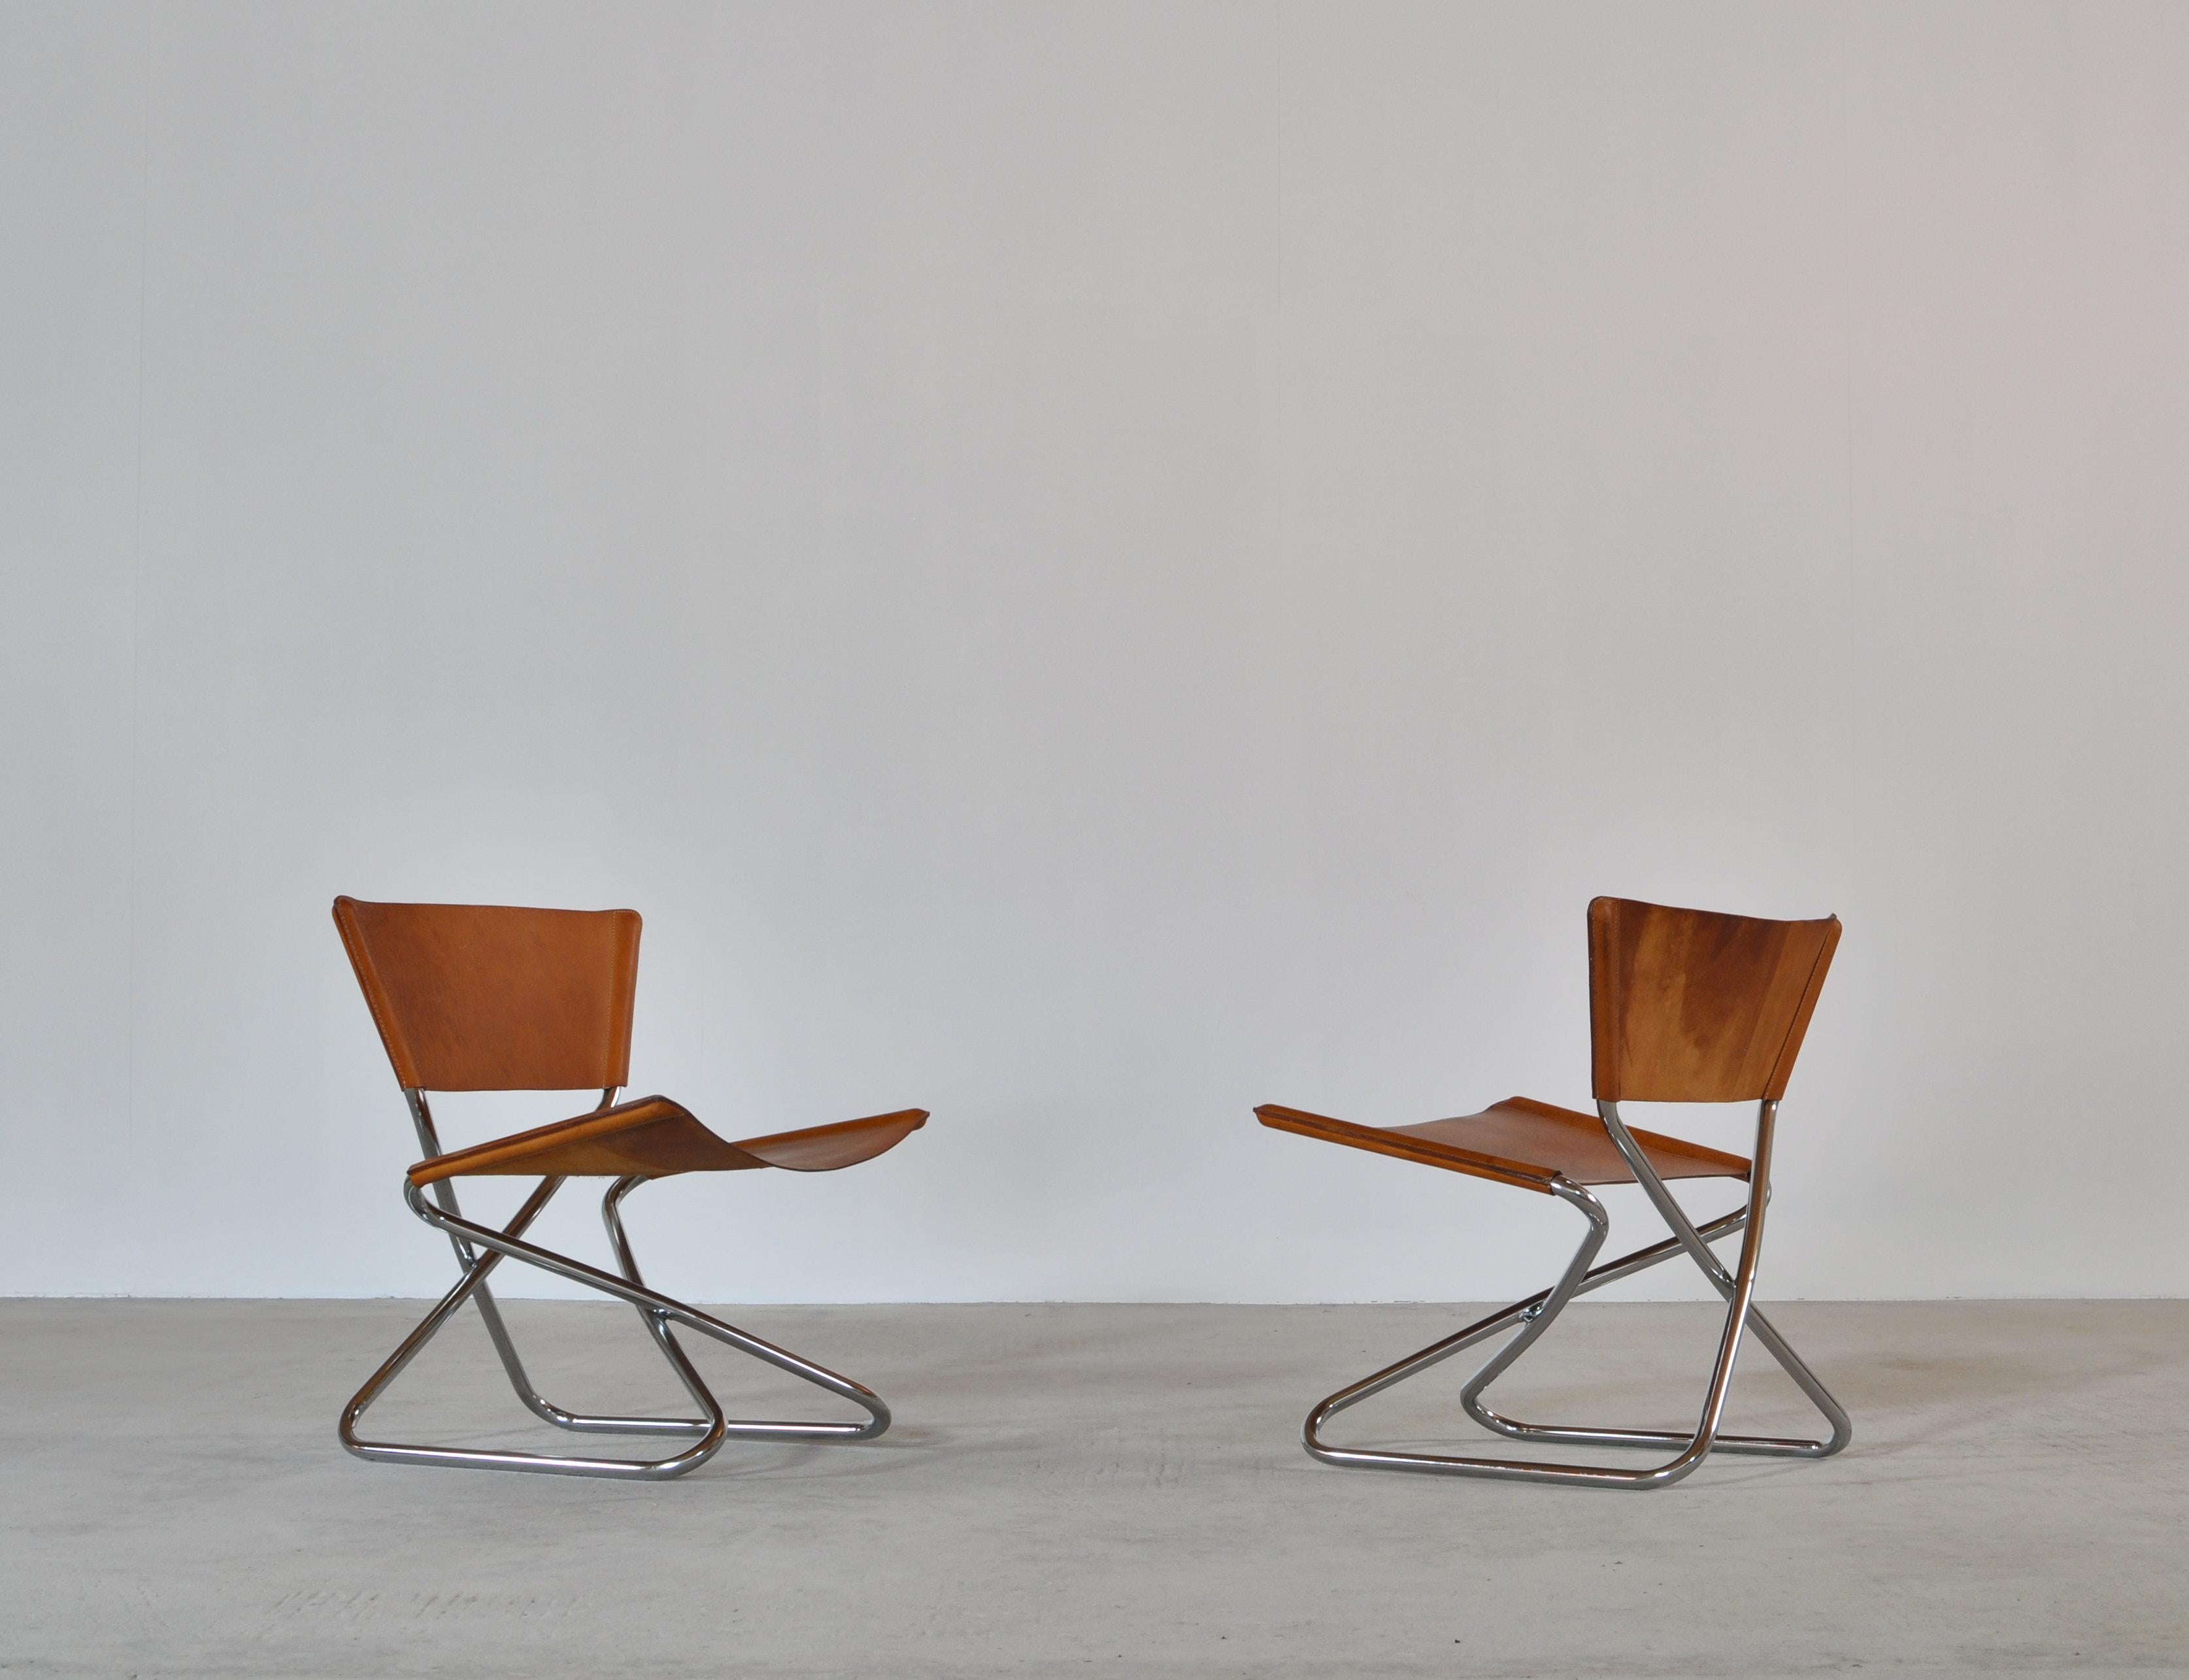 Scandinavian Modern Danish Modern Lounge Chairs in Saddle Leather and Steel by Erik Magnussen